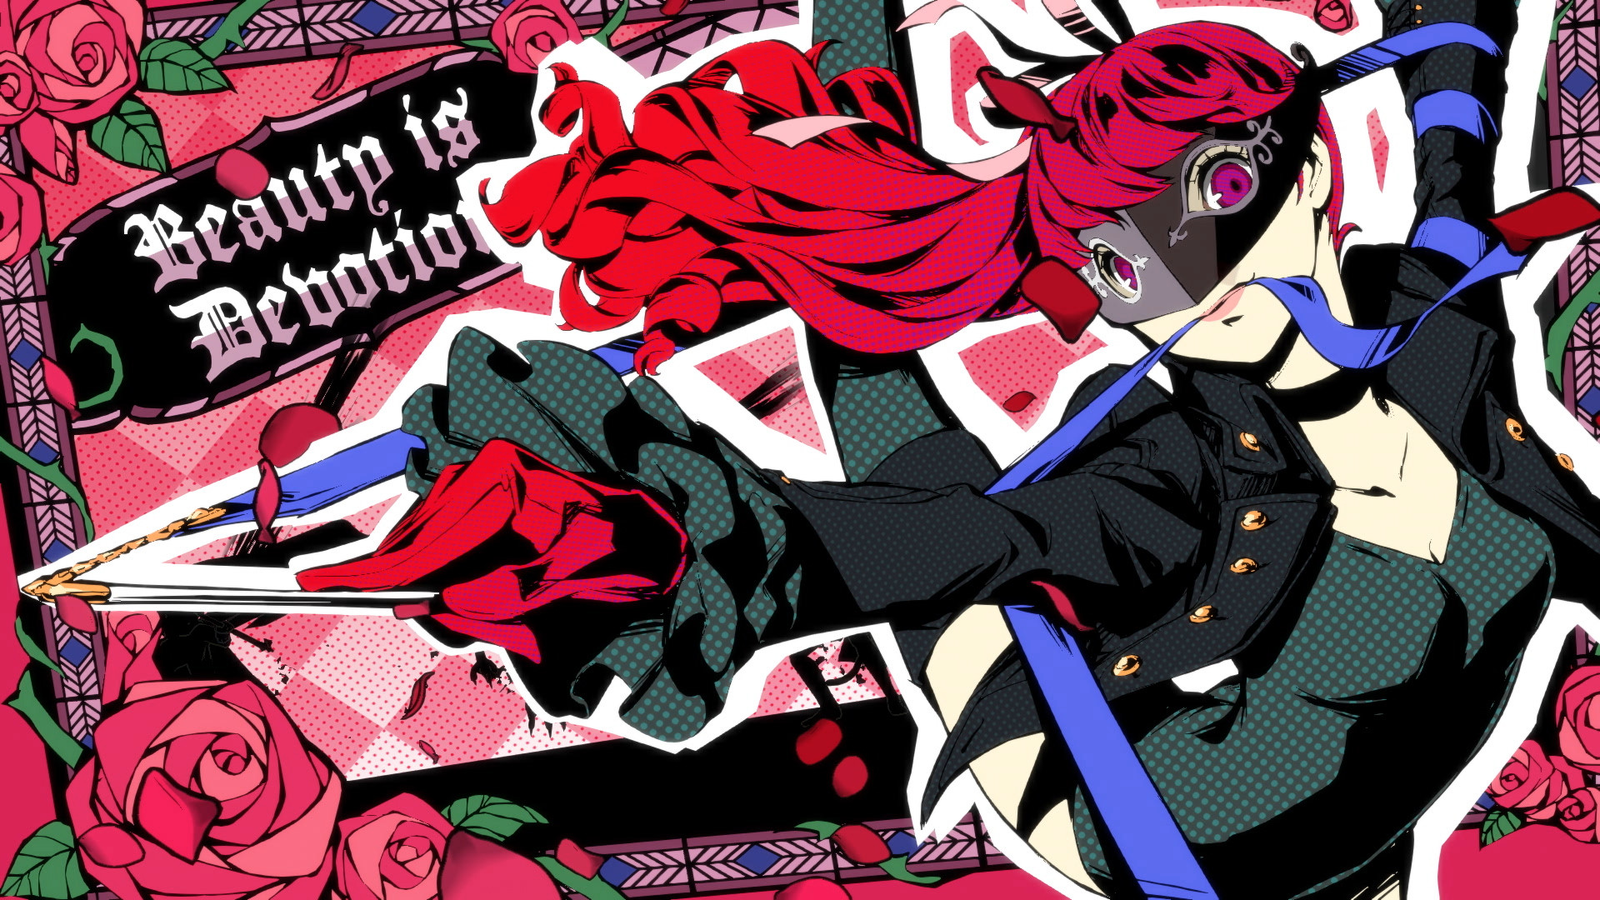 Persona 5 is still a masterpiece - and it's a must-play for those